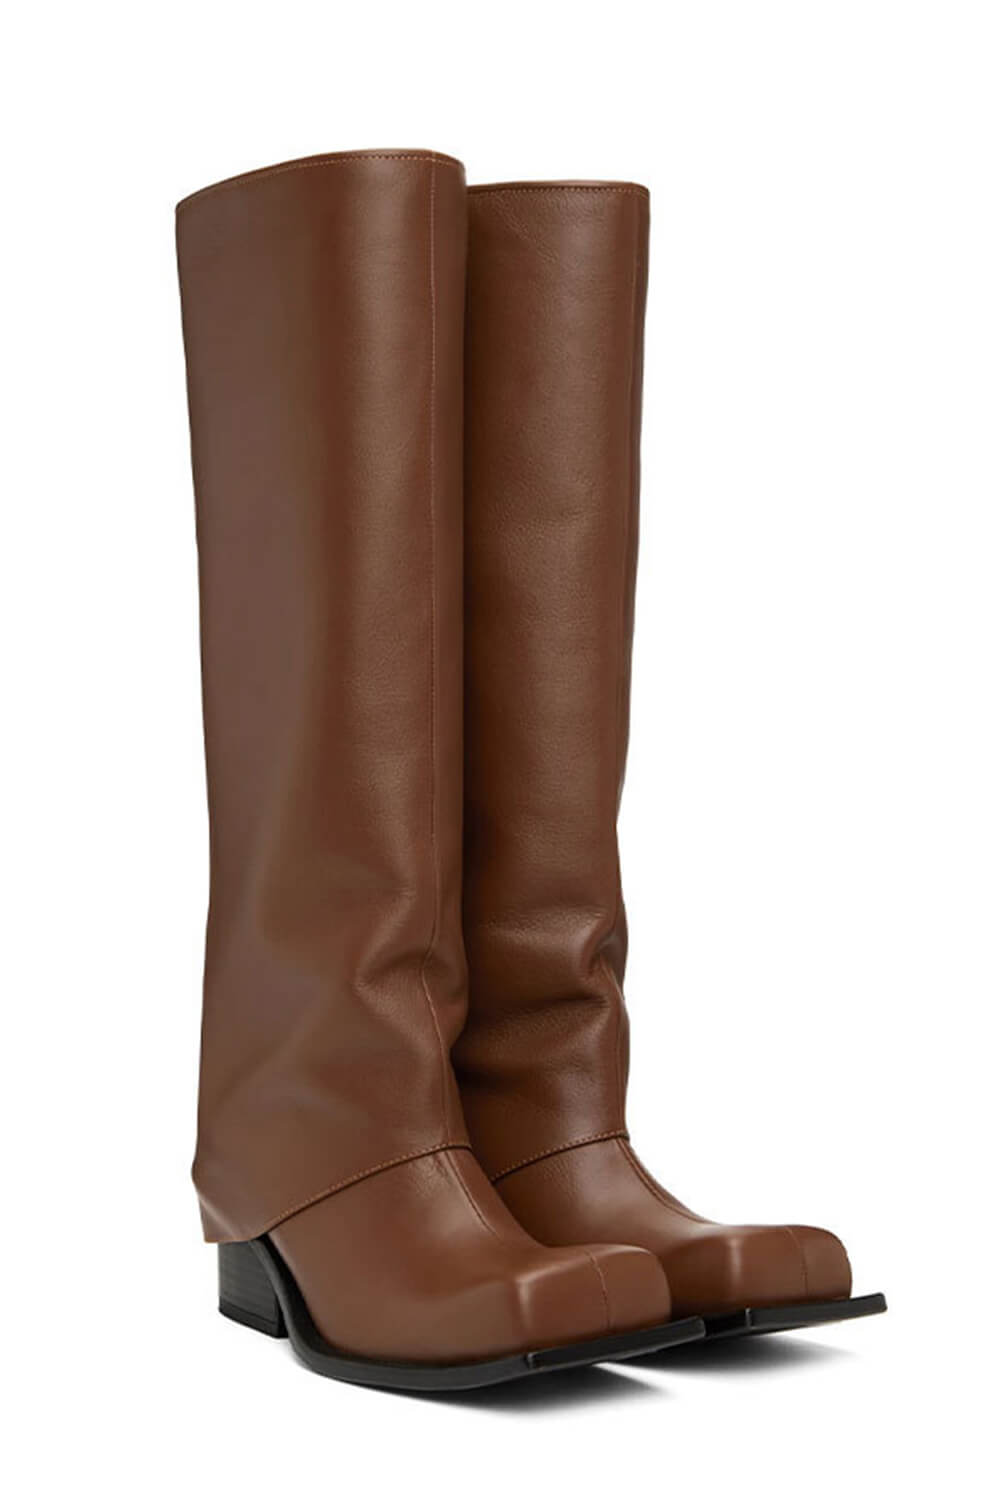 Faux Leather Fold Over Ruched Square Toe Platform Knee High Boots - Brown